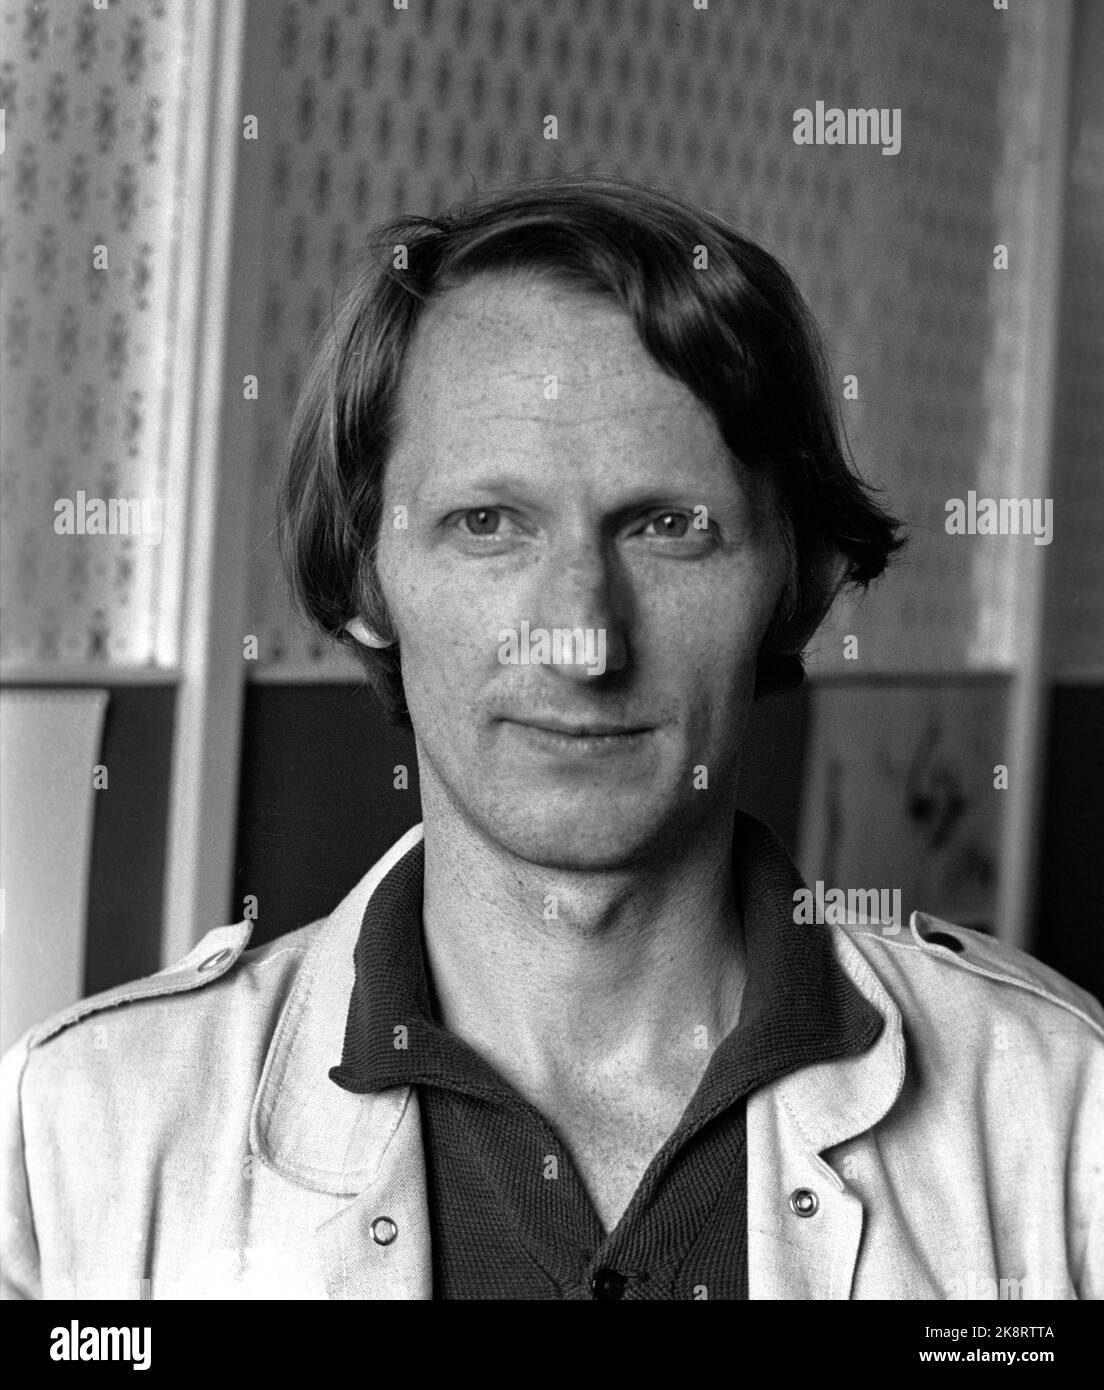 Oslo August 1971 Drawer Finn Graff, known for his caricatures and political newspaper drawings. Photo: Storløkken / Current / NTB Stock Photo